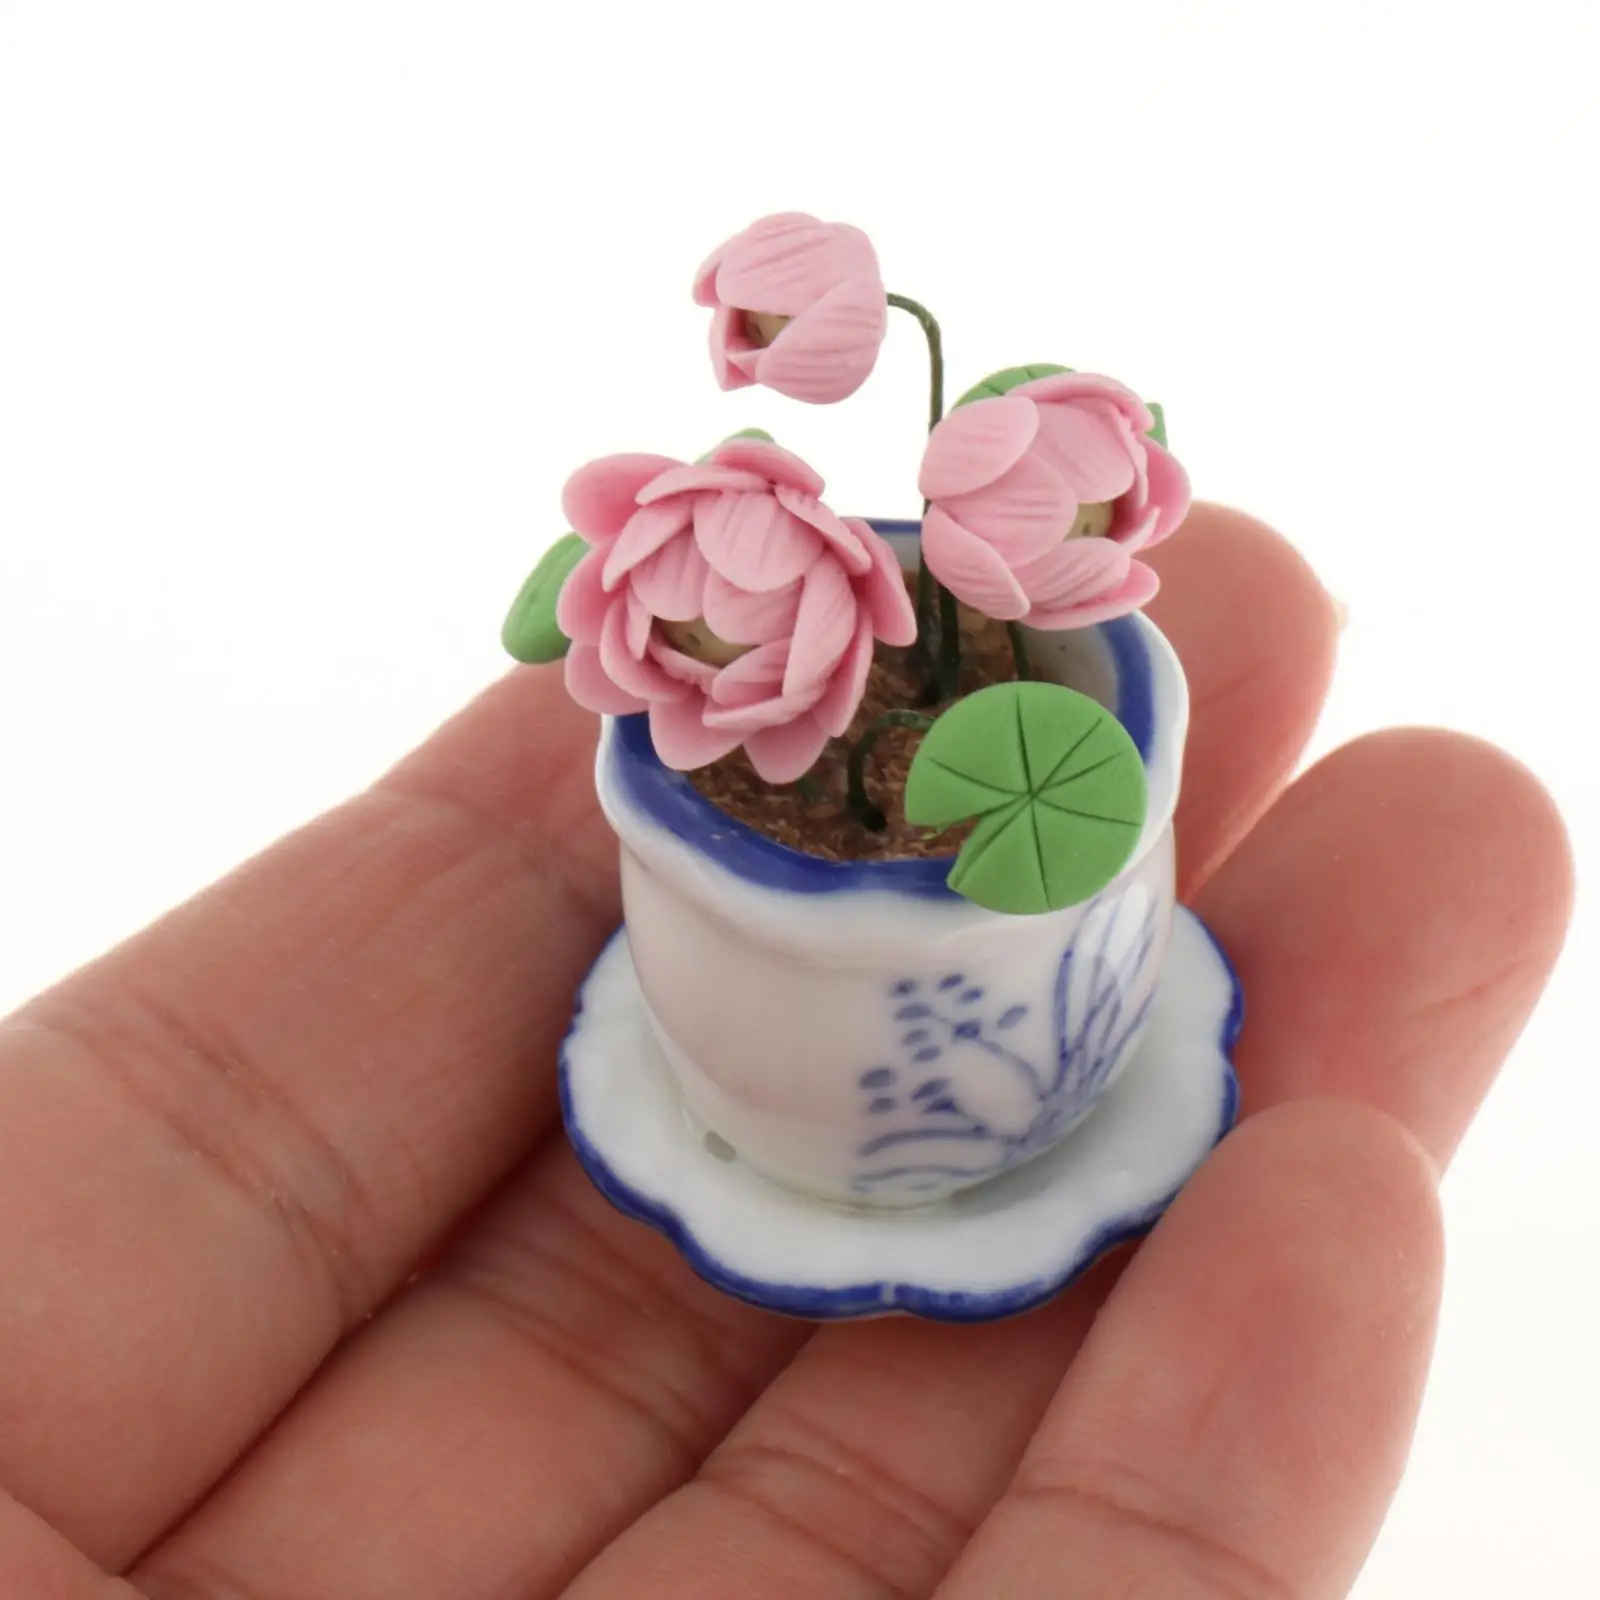 1/12 Dollhouse Mini Potted Plant Scenes Tiny Greenery Ornaments for Railway Station Fairy Garden DIY Scenery Decoration Building